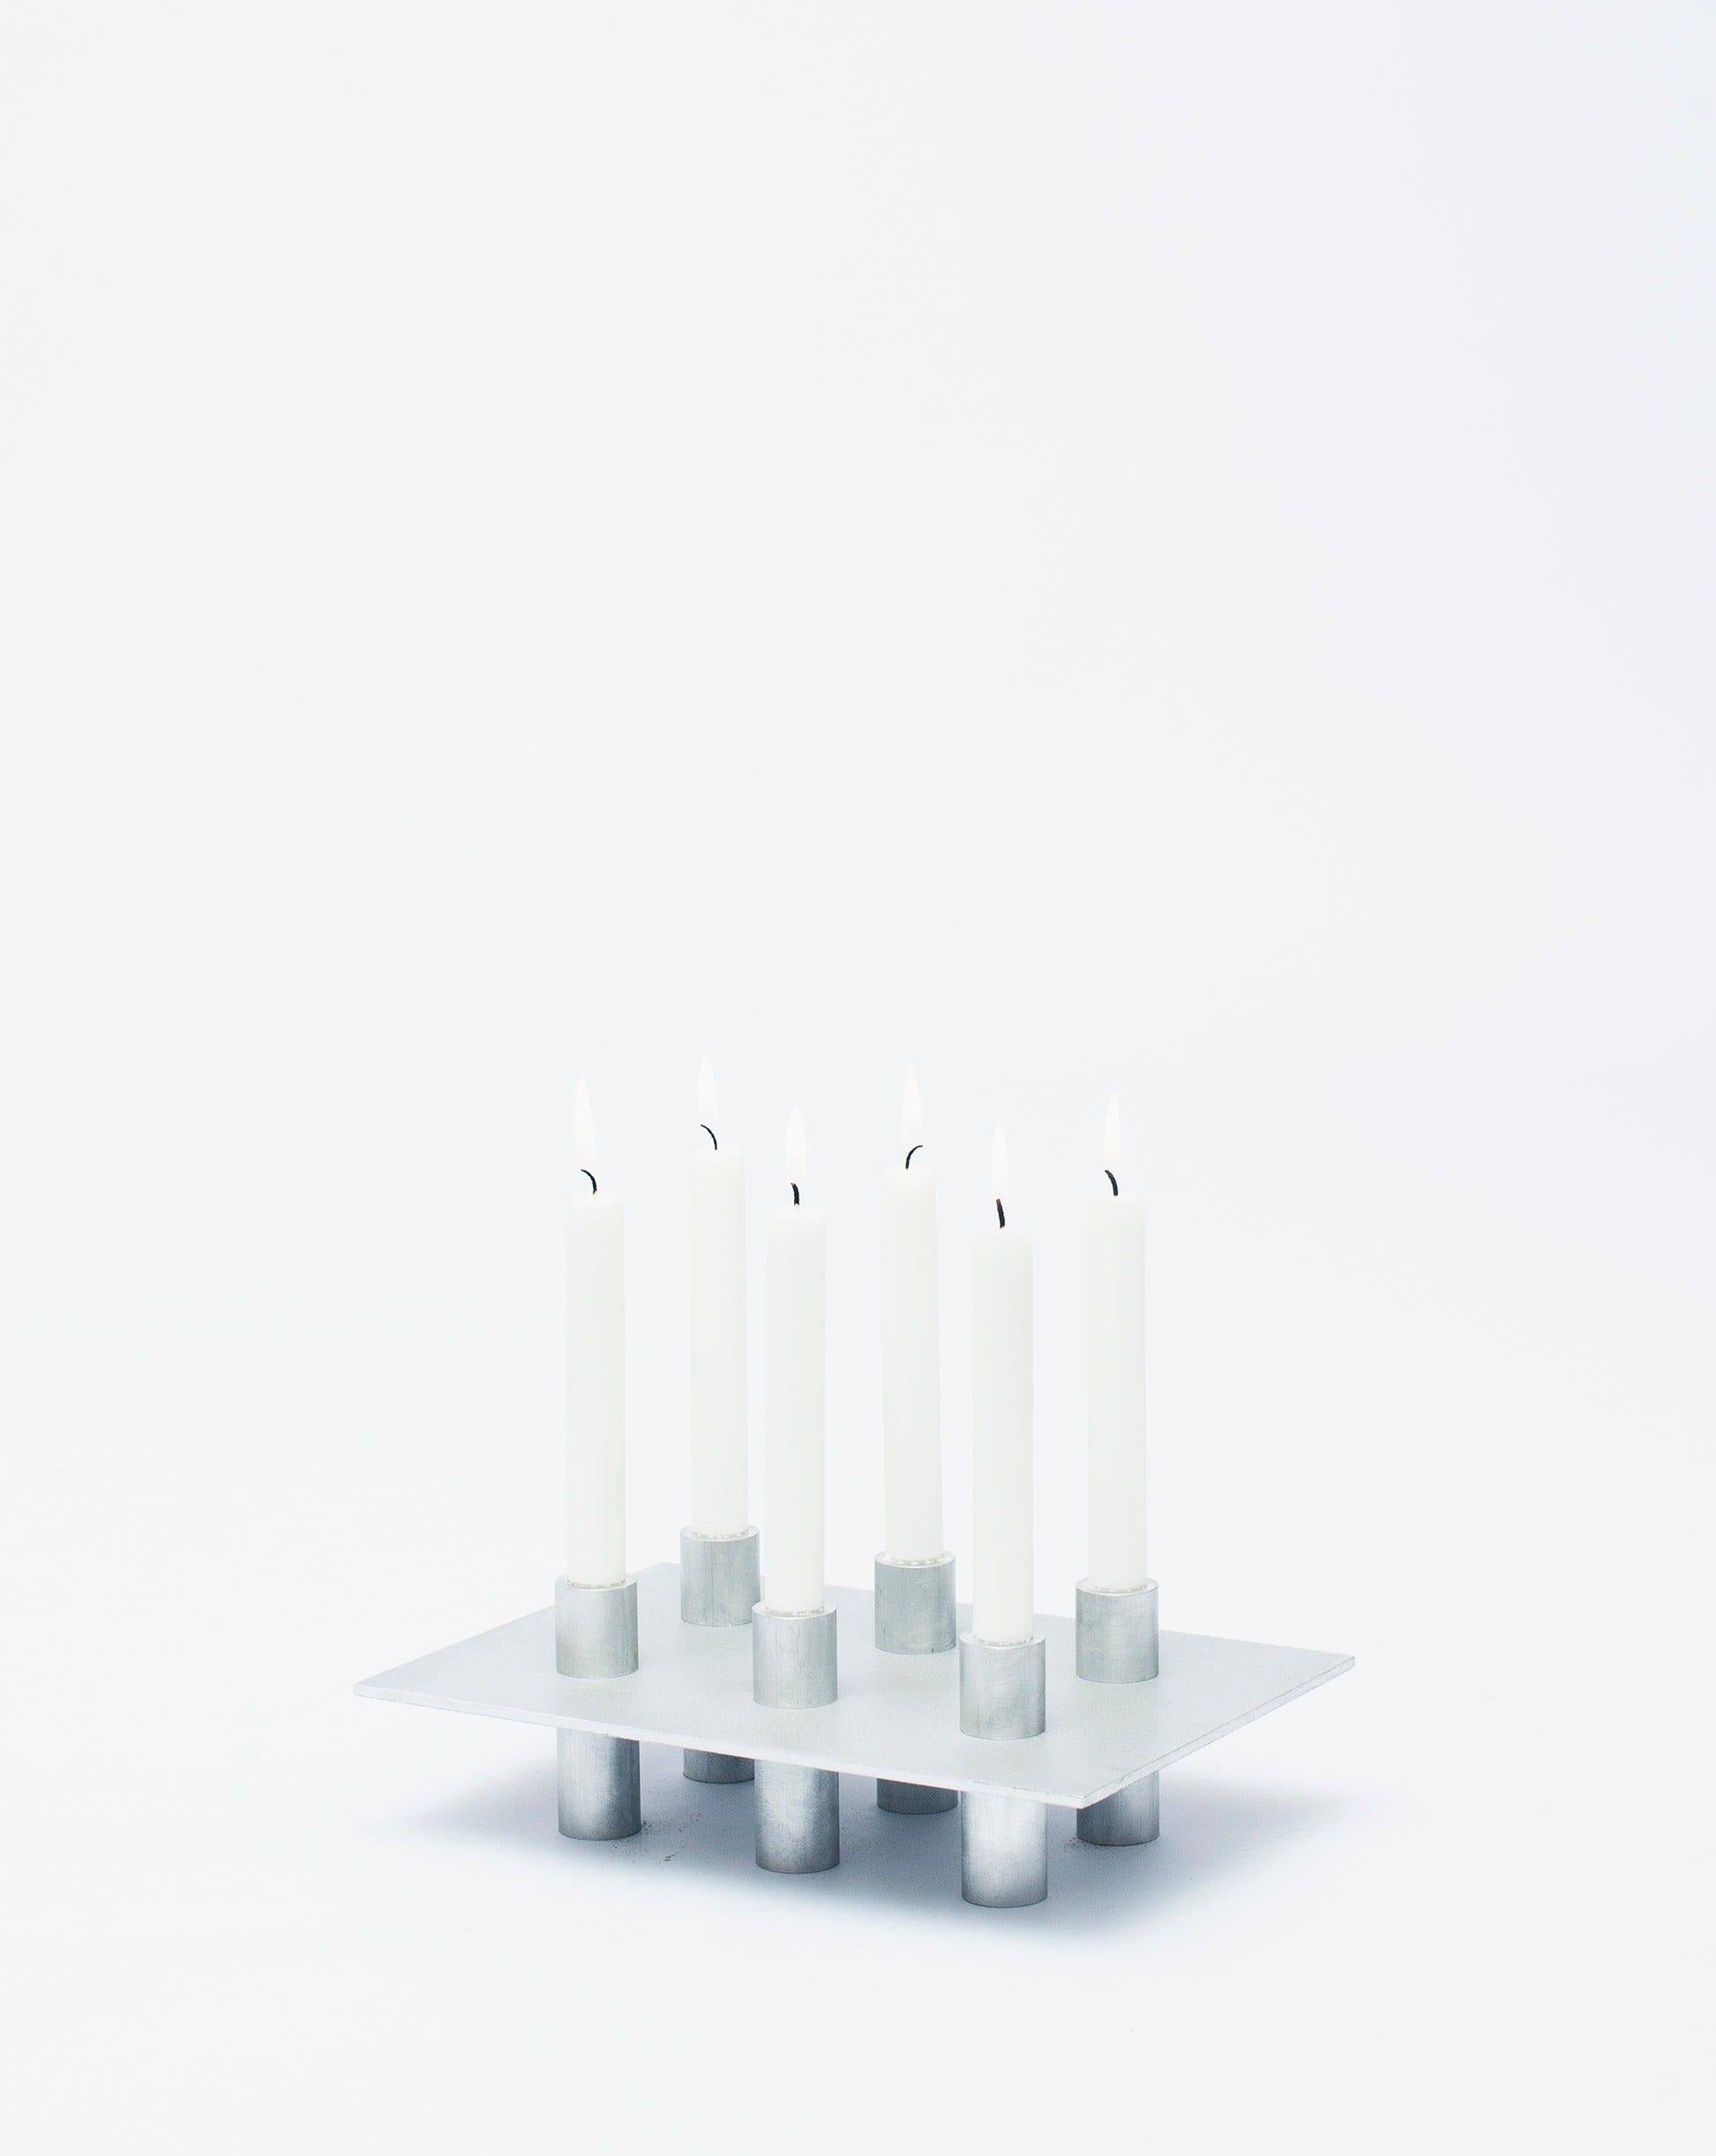 Six lighted candles on an aluminum candlestick P-L series with white background